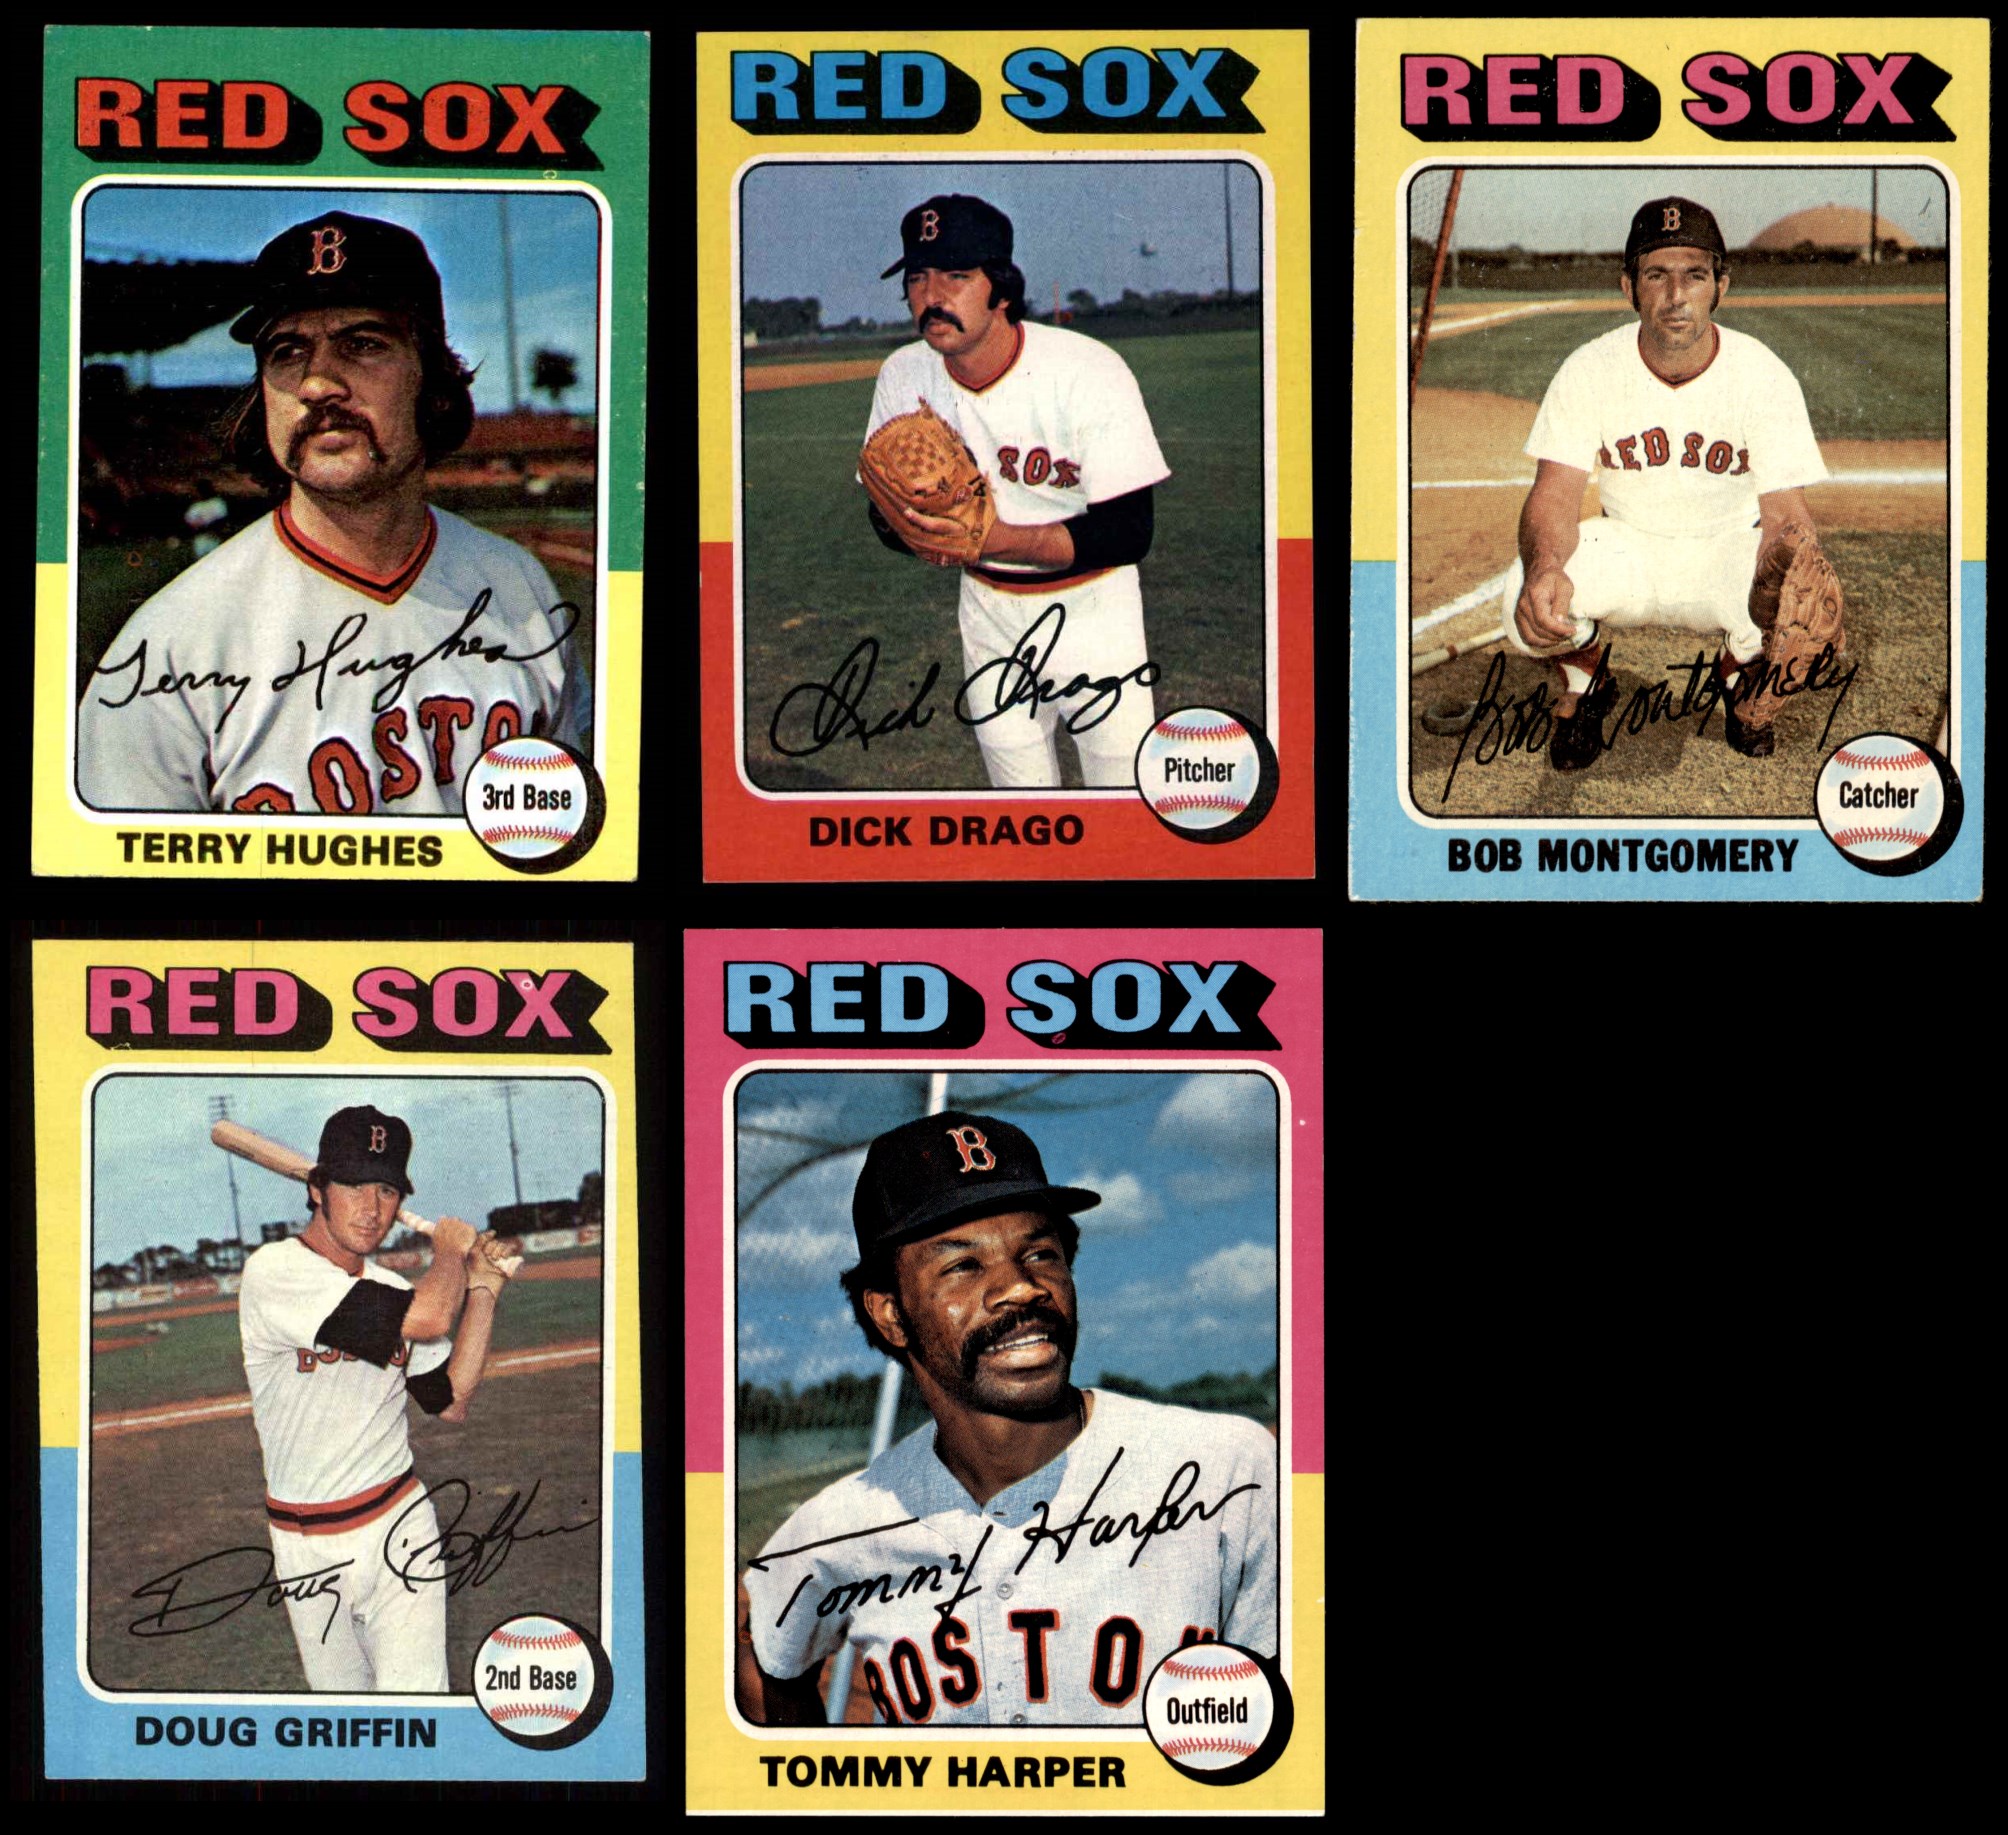 1975 red sox roster